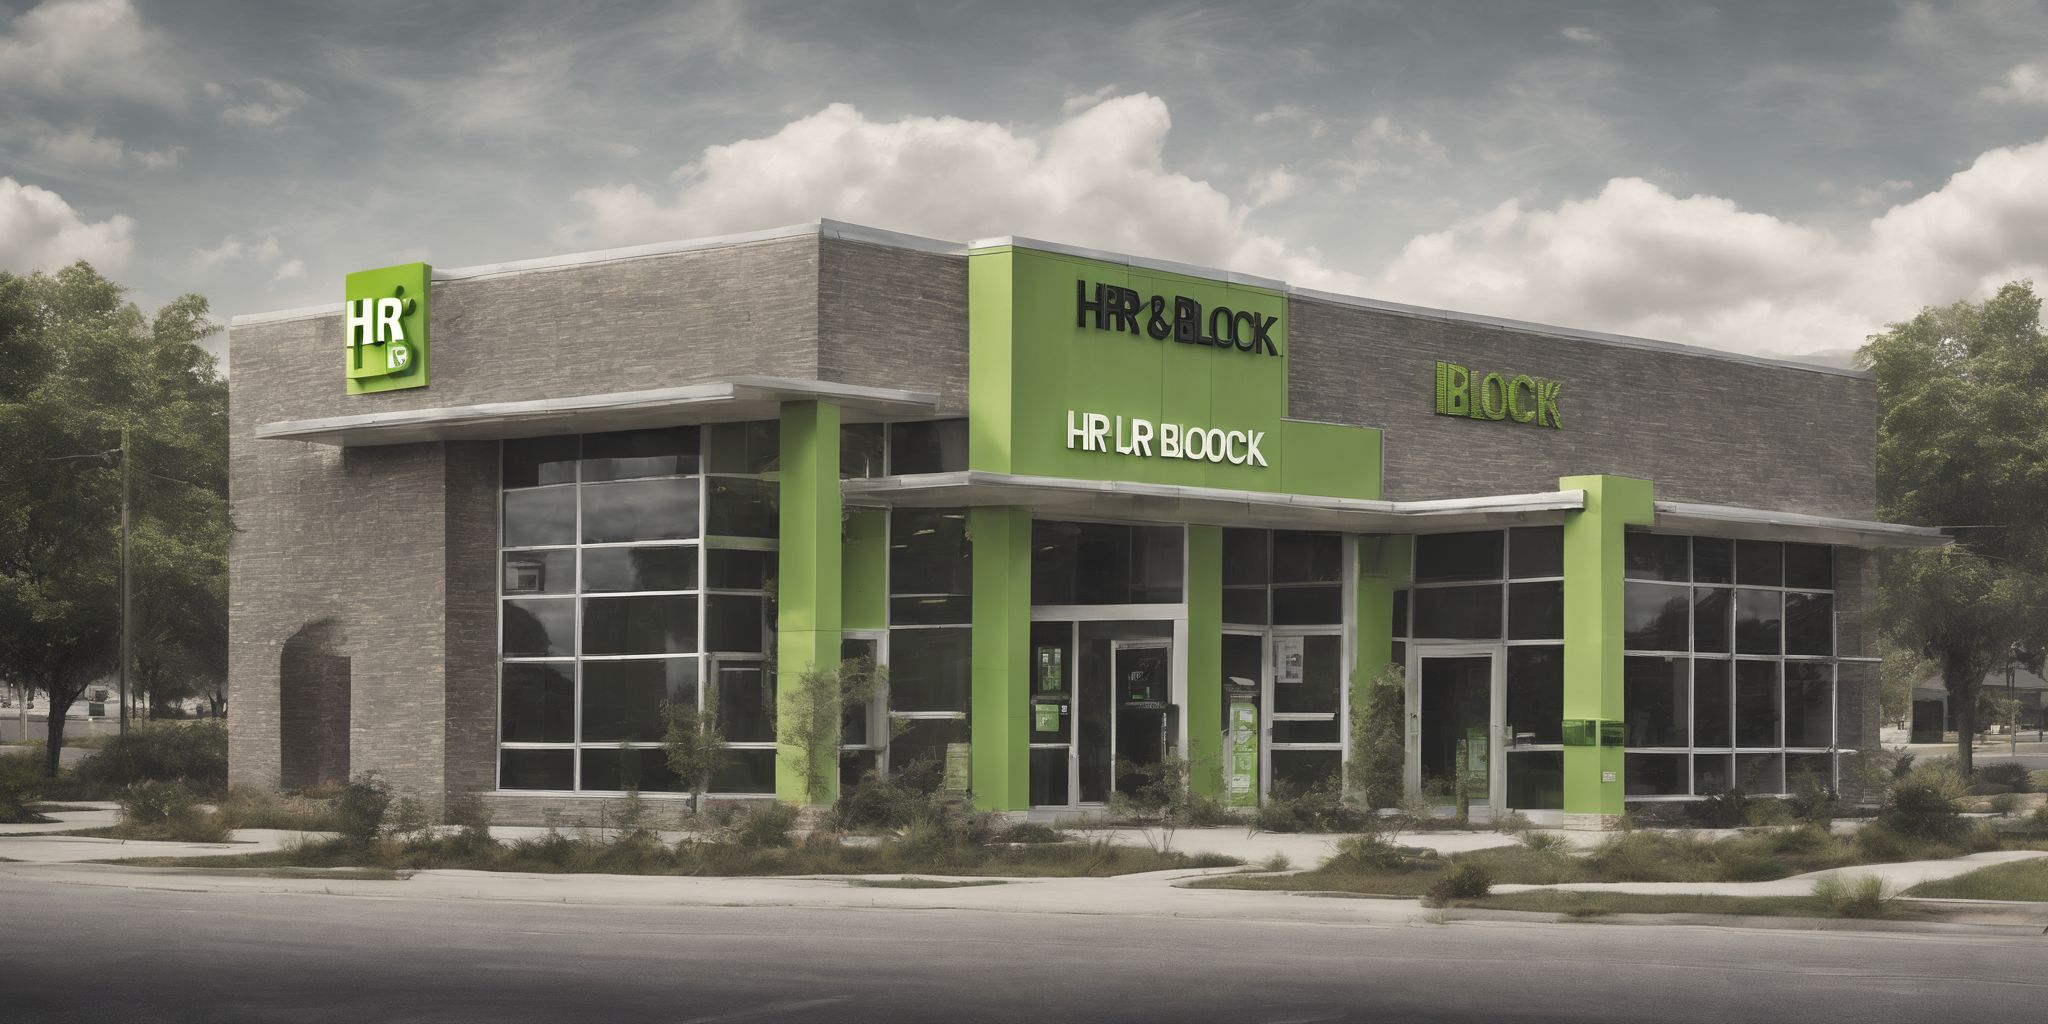 H&R Block  in realistic, photographic style